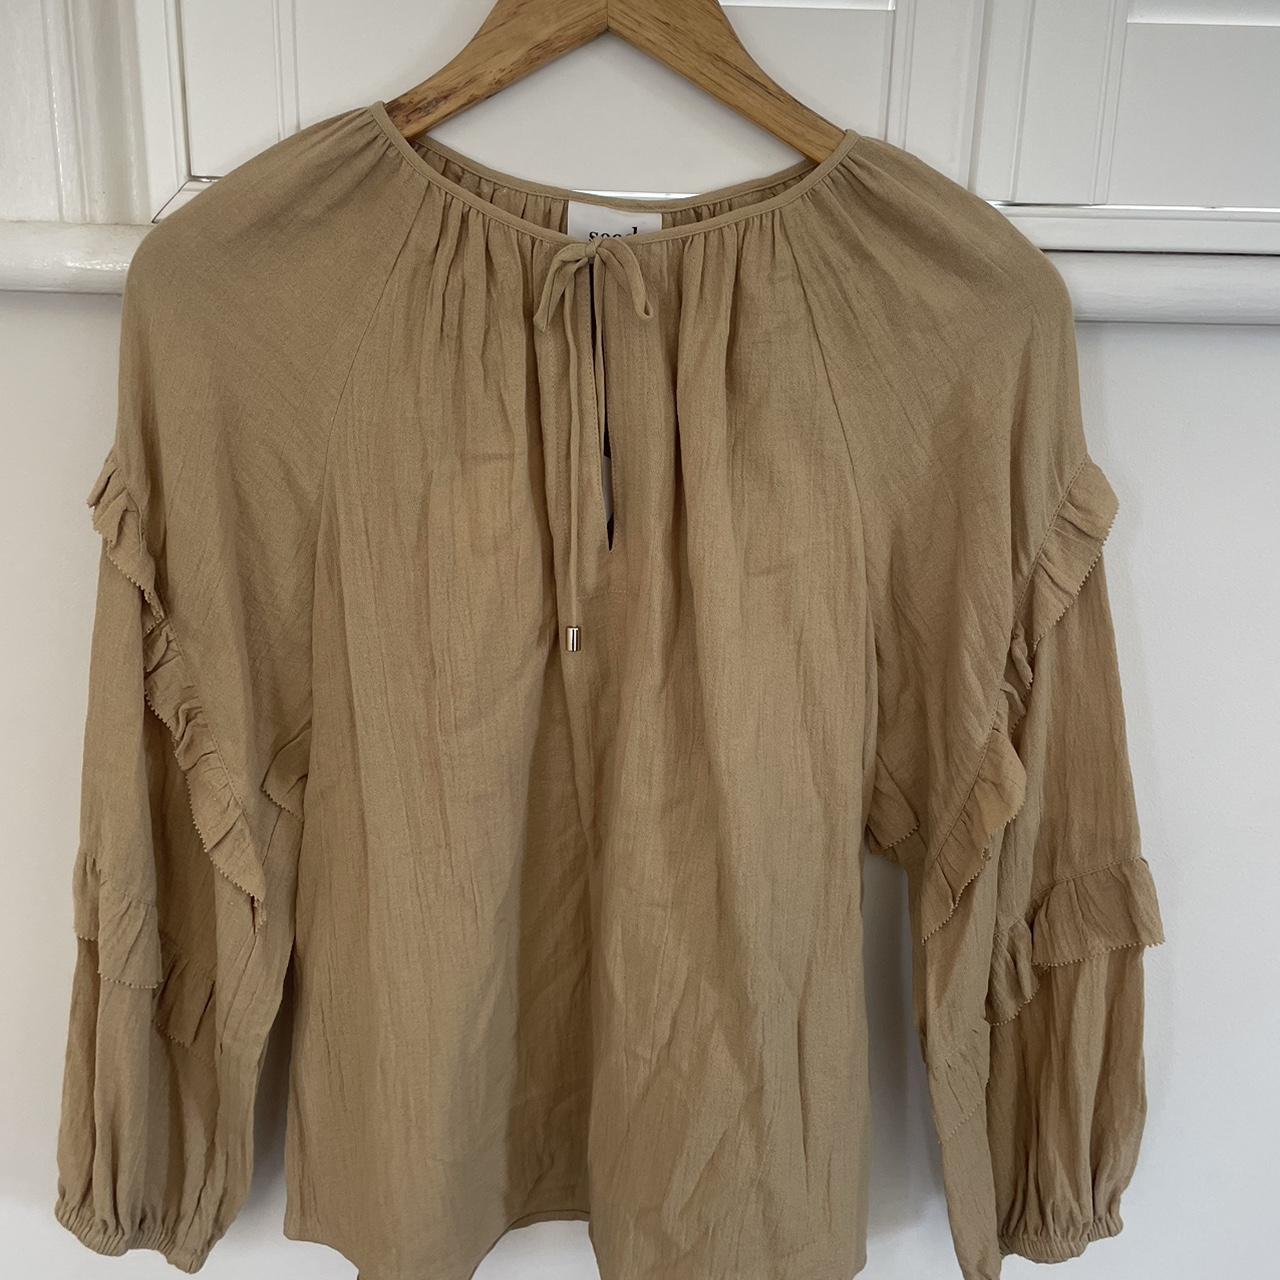 Seed Shirt NEVER BEEN WORN, TAG ON RRP: $99.95 - Depop